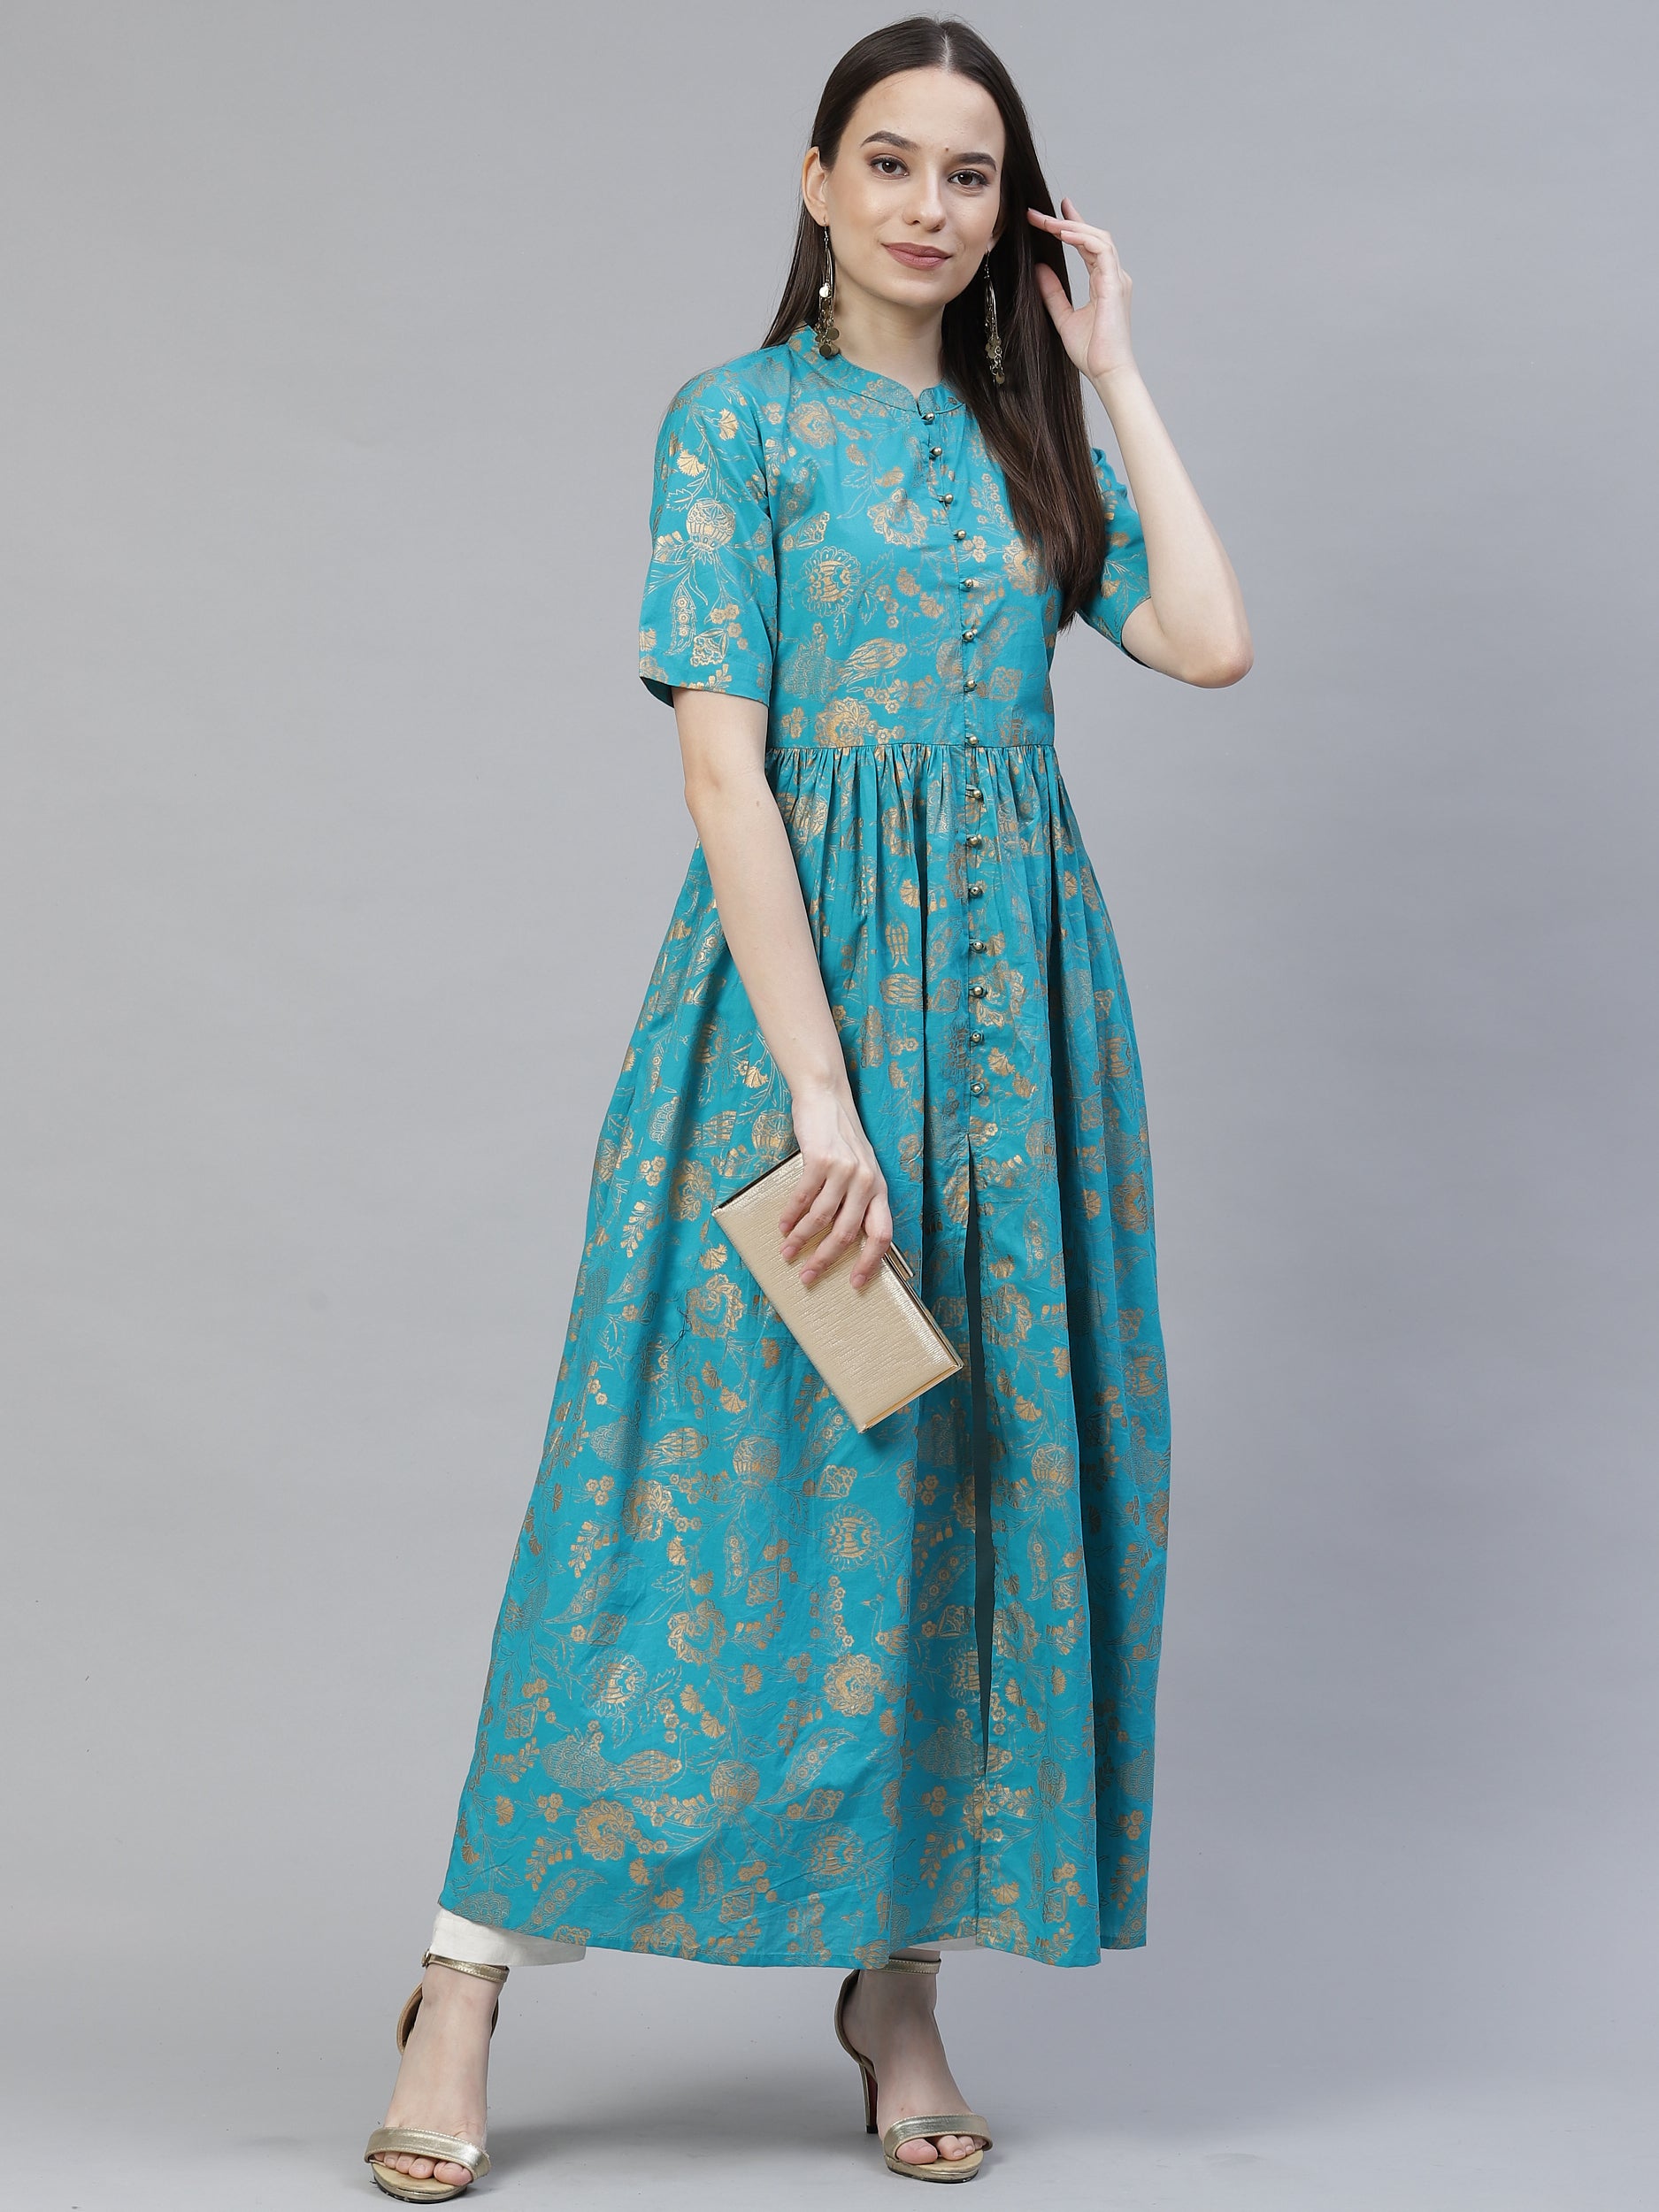 Women's turquoise blue and gold printed maxi dress - Meeranshi